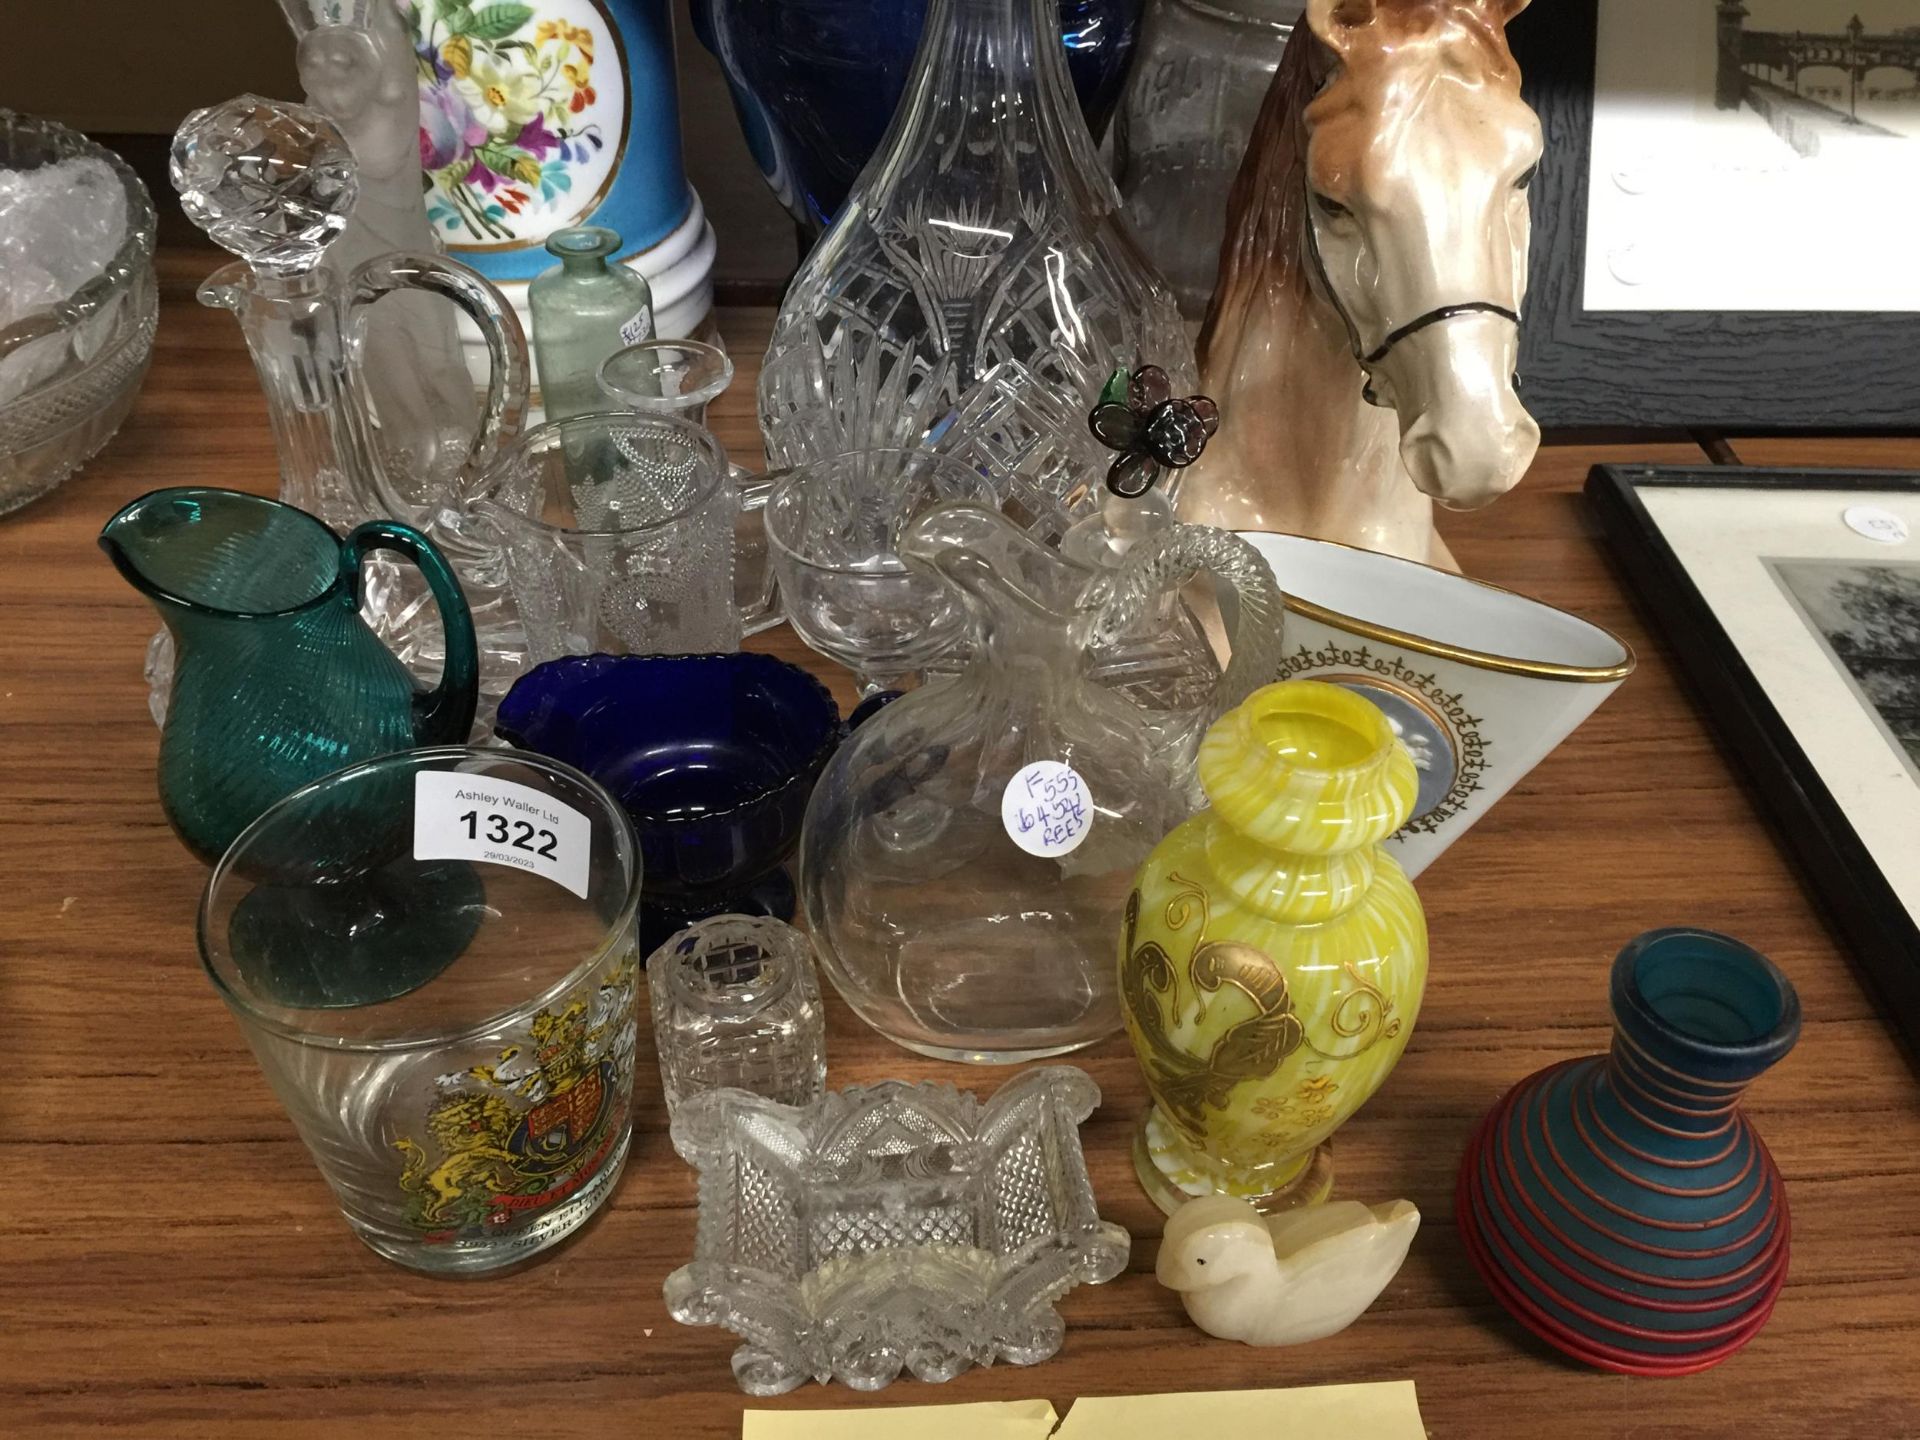 A MIXED LOT TO INCLUDE A LARGE BLUE GLASS HEAD, A CERAMIC HORSES HEAD, A DECANTER, GLASS JUGS, SMALL - Image 3 of 5